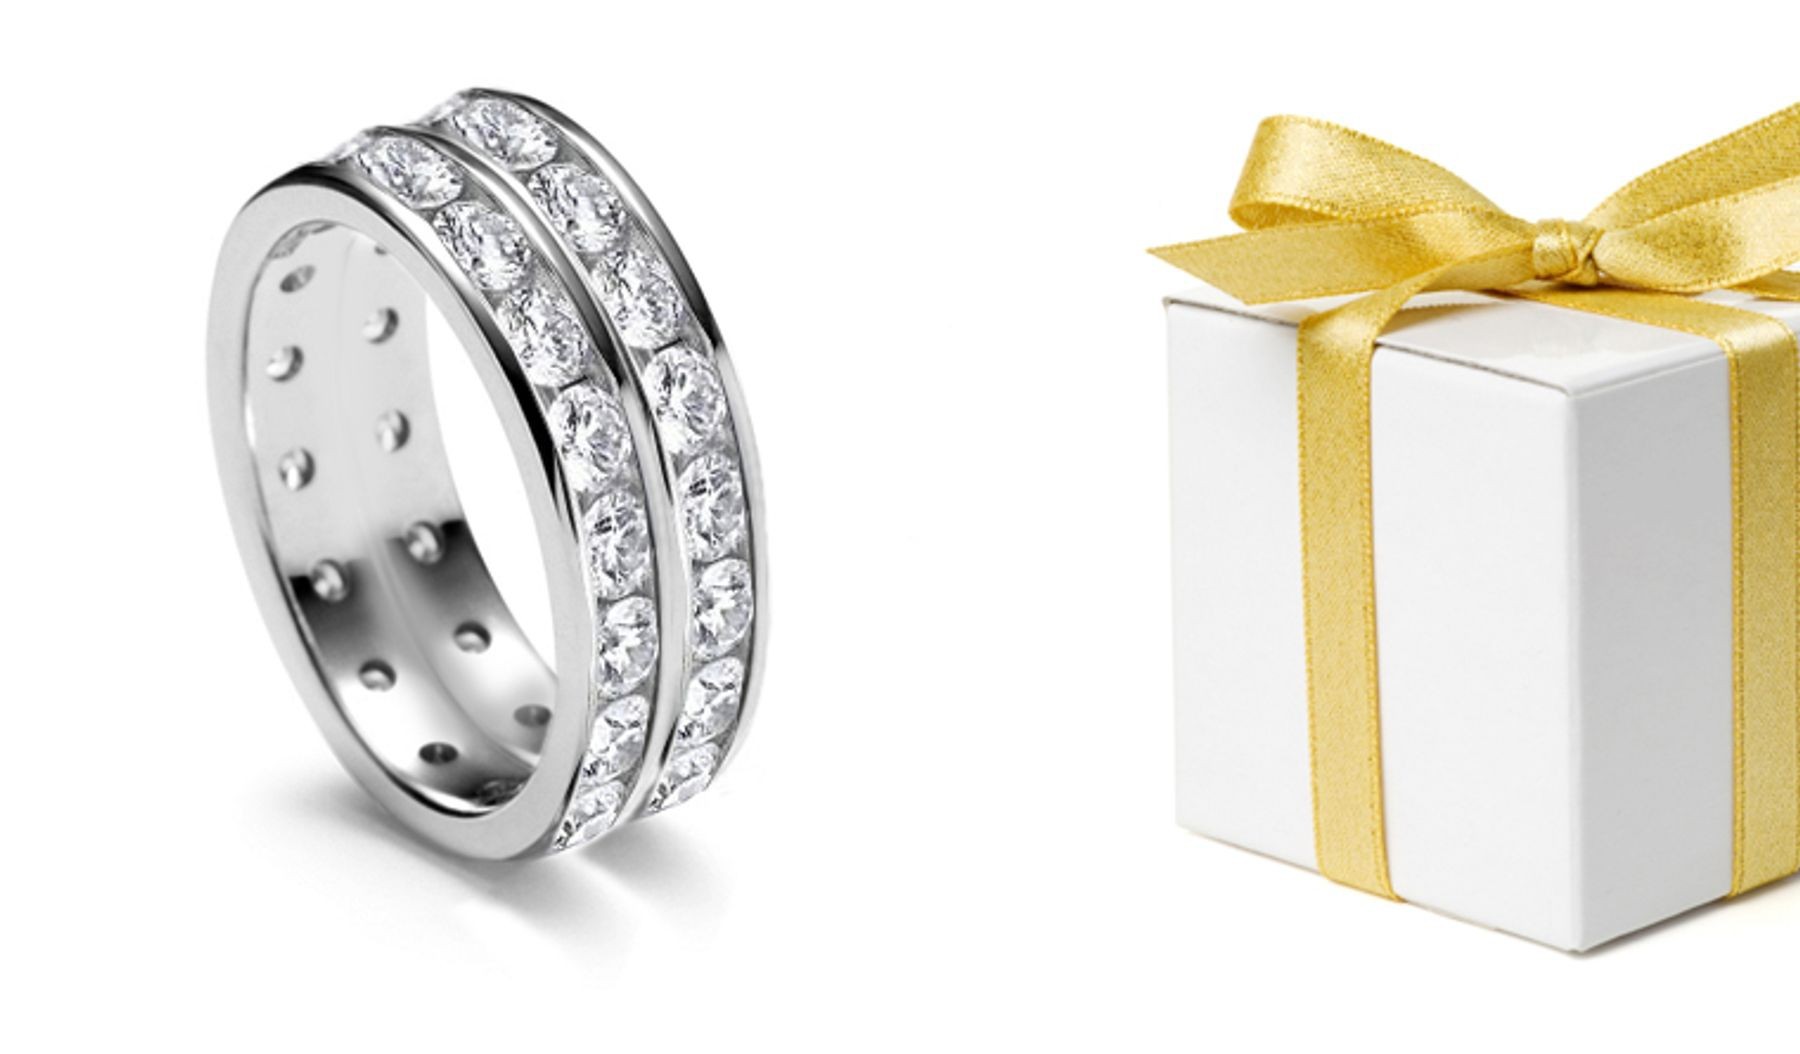 Painstakingly Crafted: A Matched Pair of Sparkling Diamond Wedding Bands in Ring Size 3 to 8 View